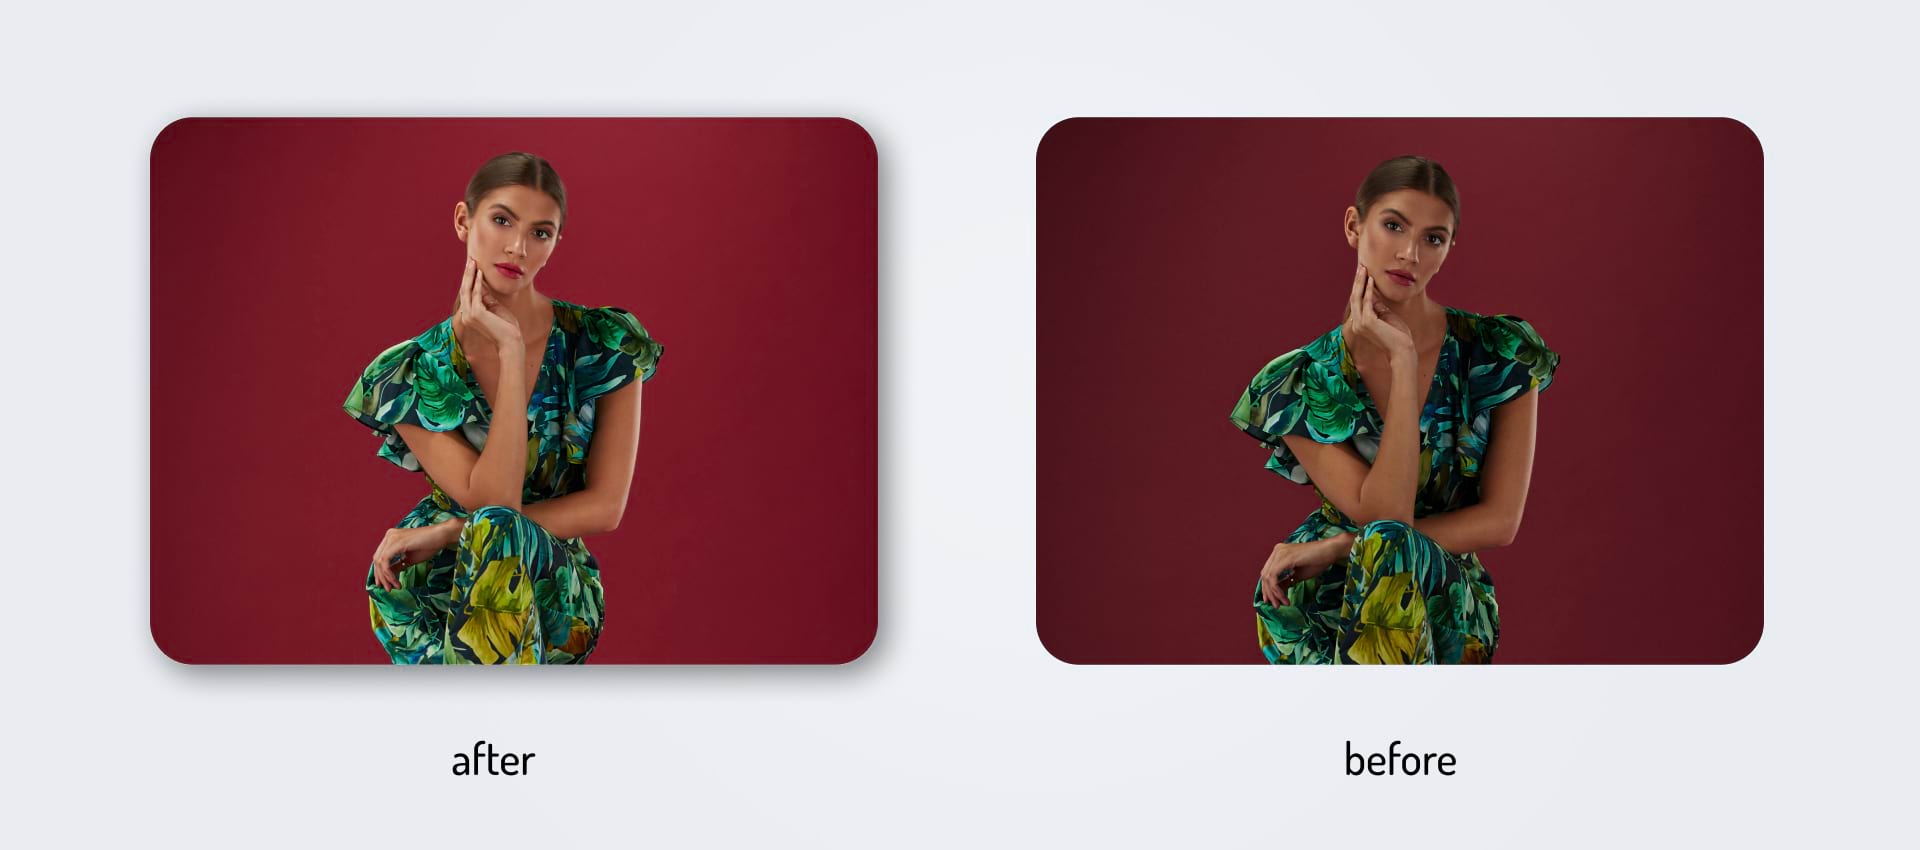 Two photos illustrating the before and after effect of the retouching process